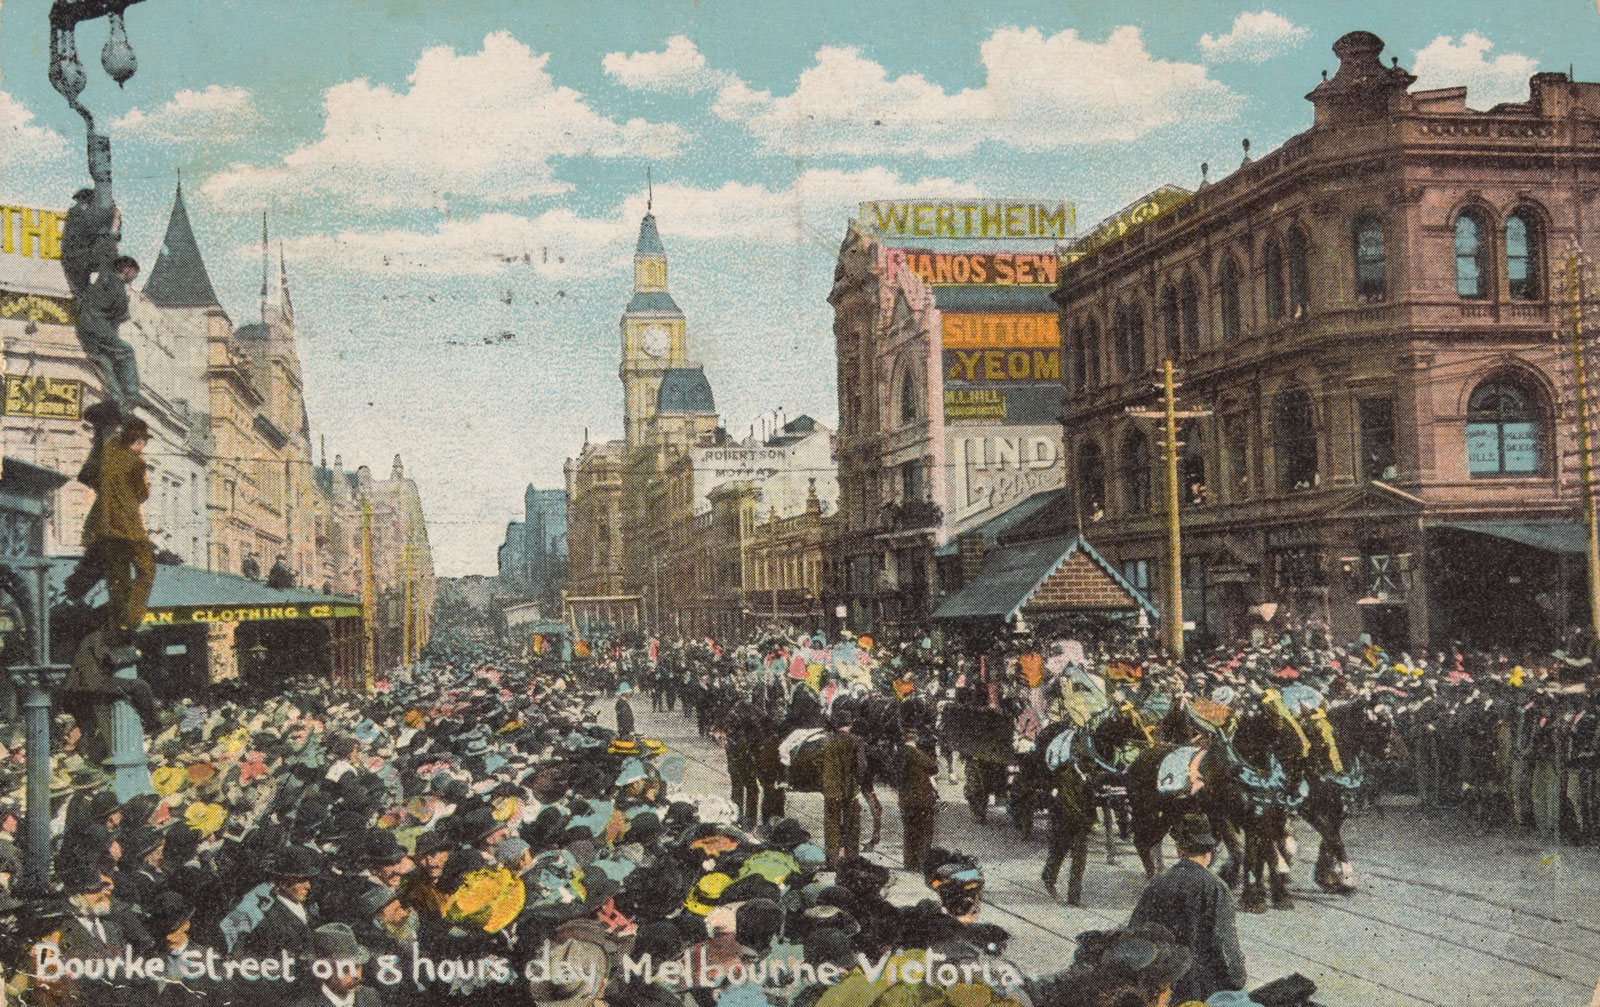 An eight-hour day parade in Bourke Street, Melbourne, 1907.